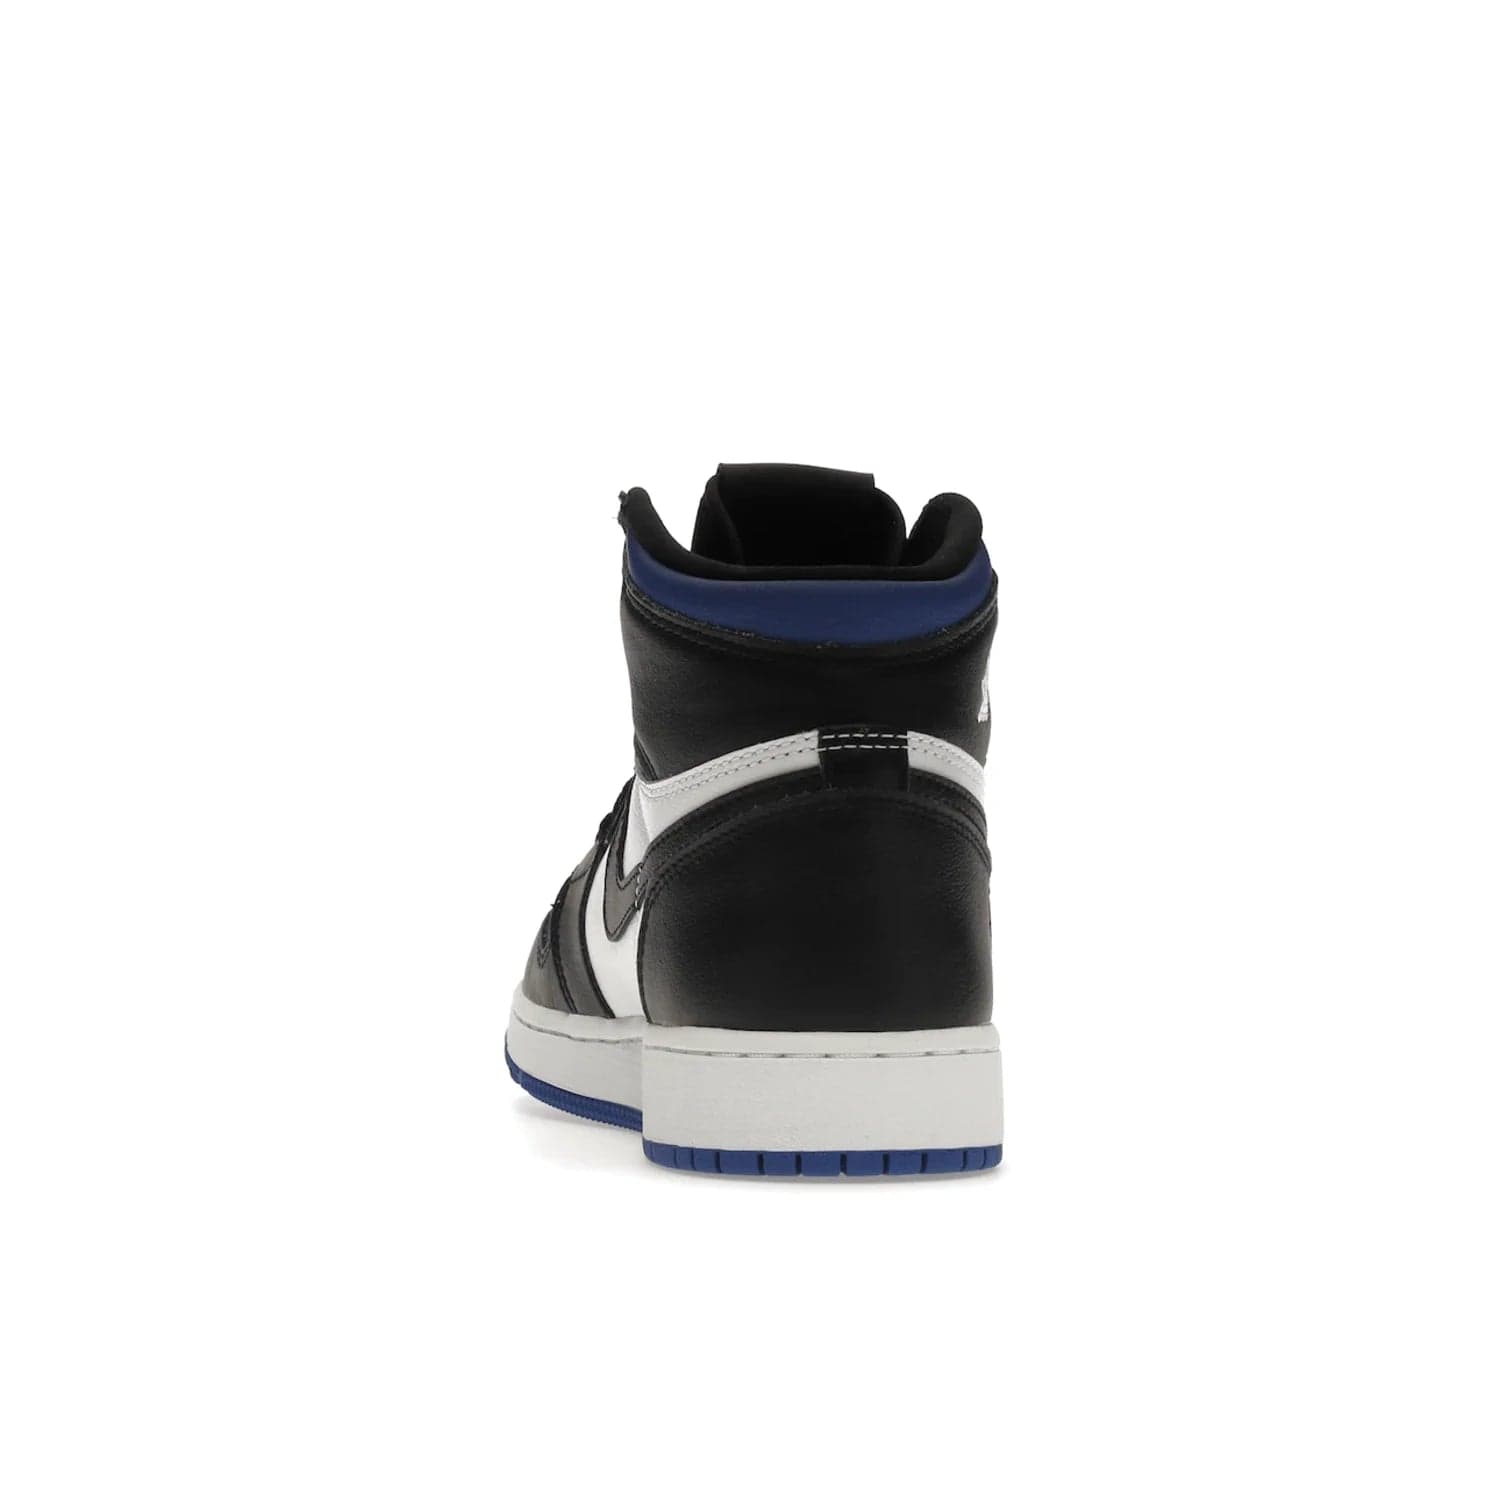 Jordan 1 Retro High Royal Toe (GS) - Image 27 - Only at www.BallersClubKickz.com - Take your sneaker wardrobe to the next level with the Jordan 1 Retro High Royal Toe (GS). Combining classic design with a luxurious white and royal blue leather upper, a textured black Swoosh and a tapered outsole. Stand out with the Air Jordan Wings logo near the heel.